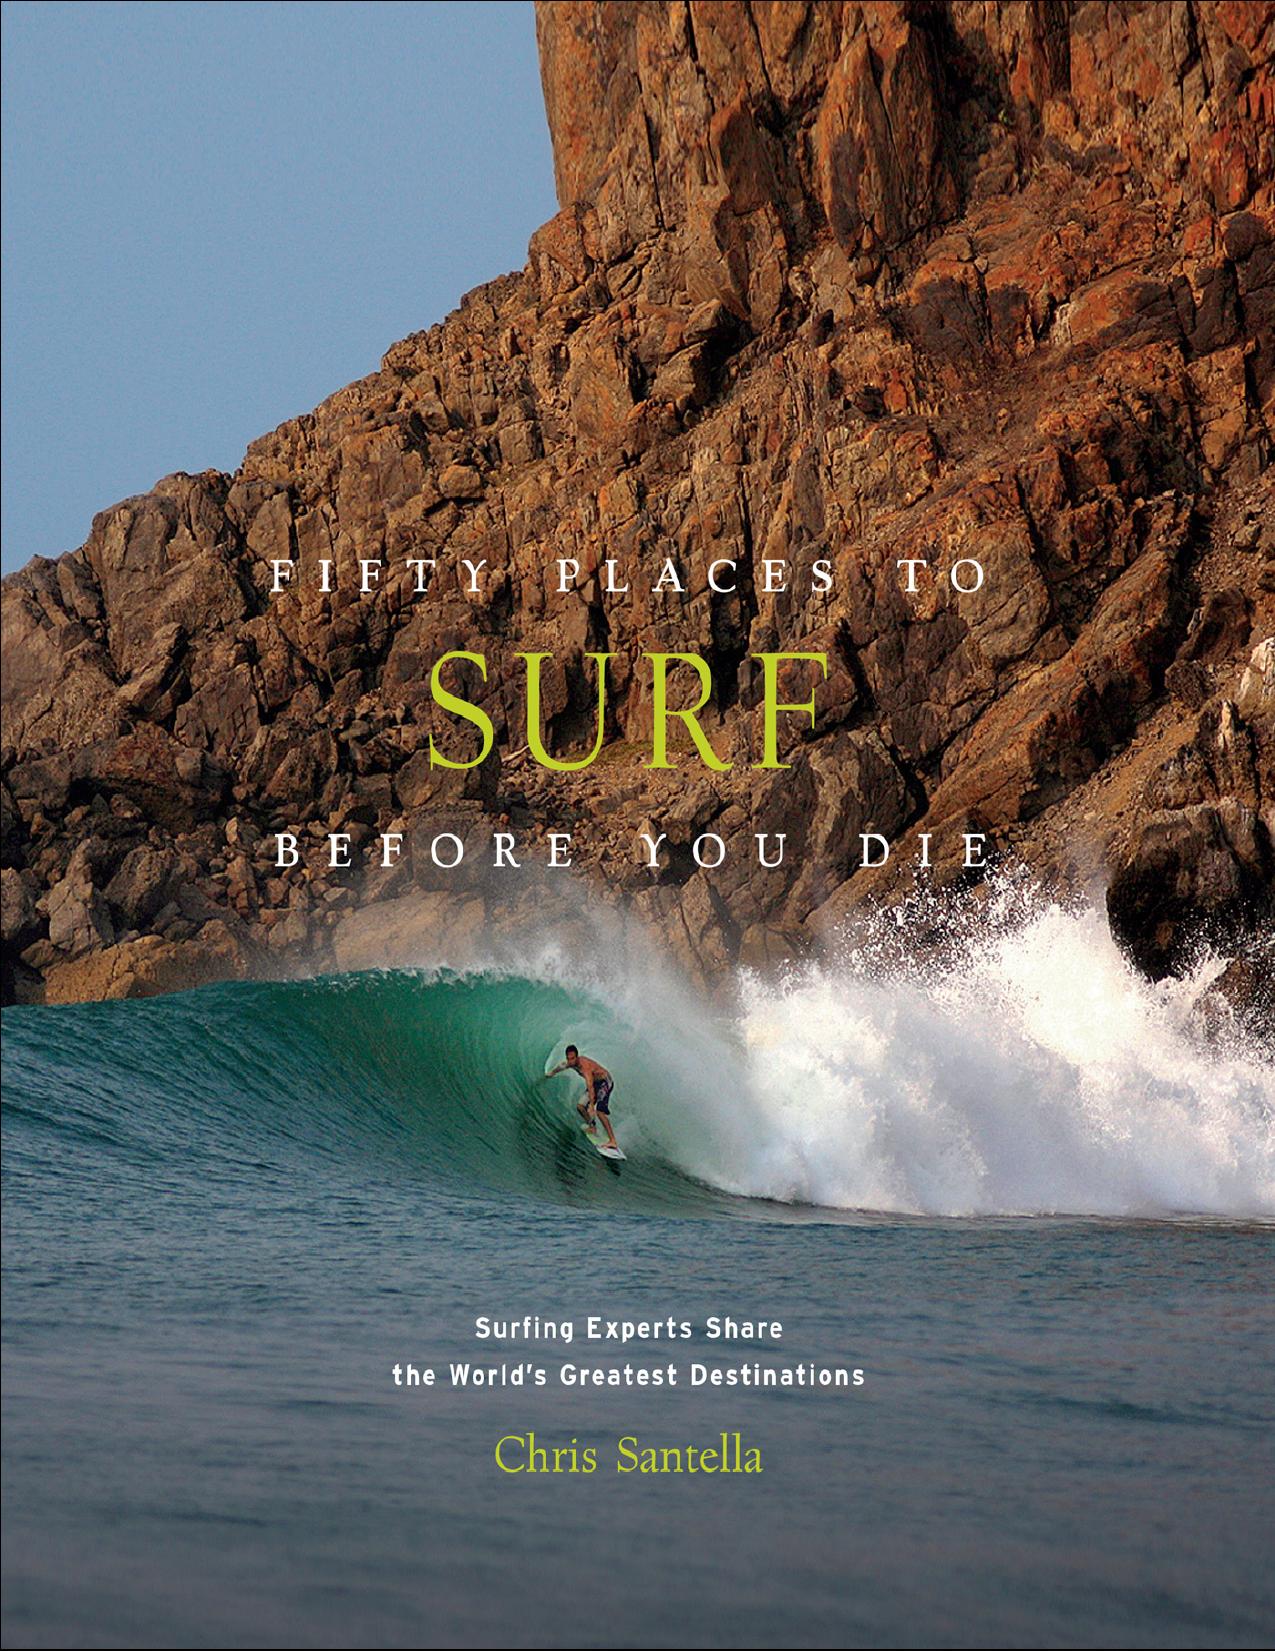 Fifty Places to Surf Before You Die by Chris Santella